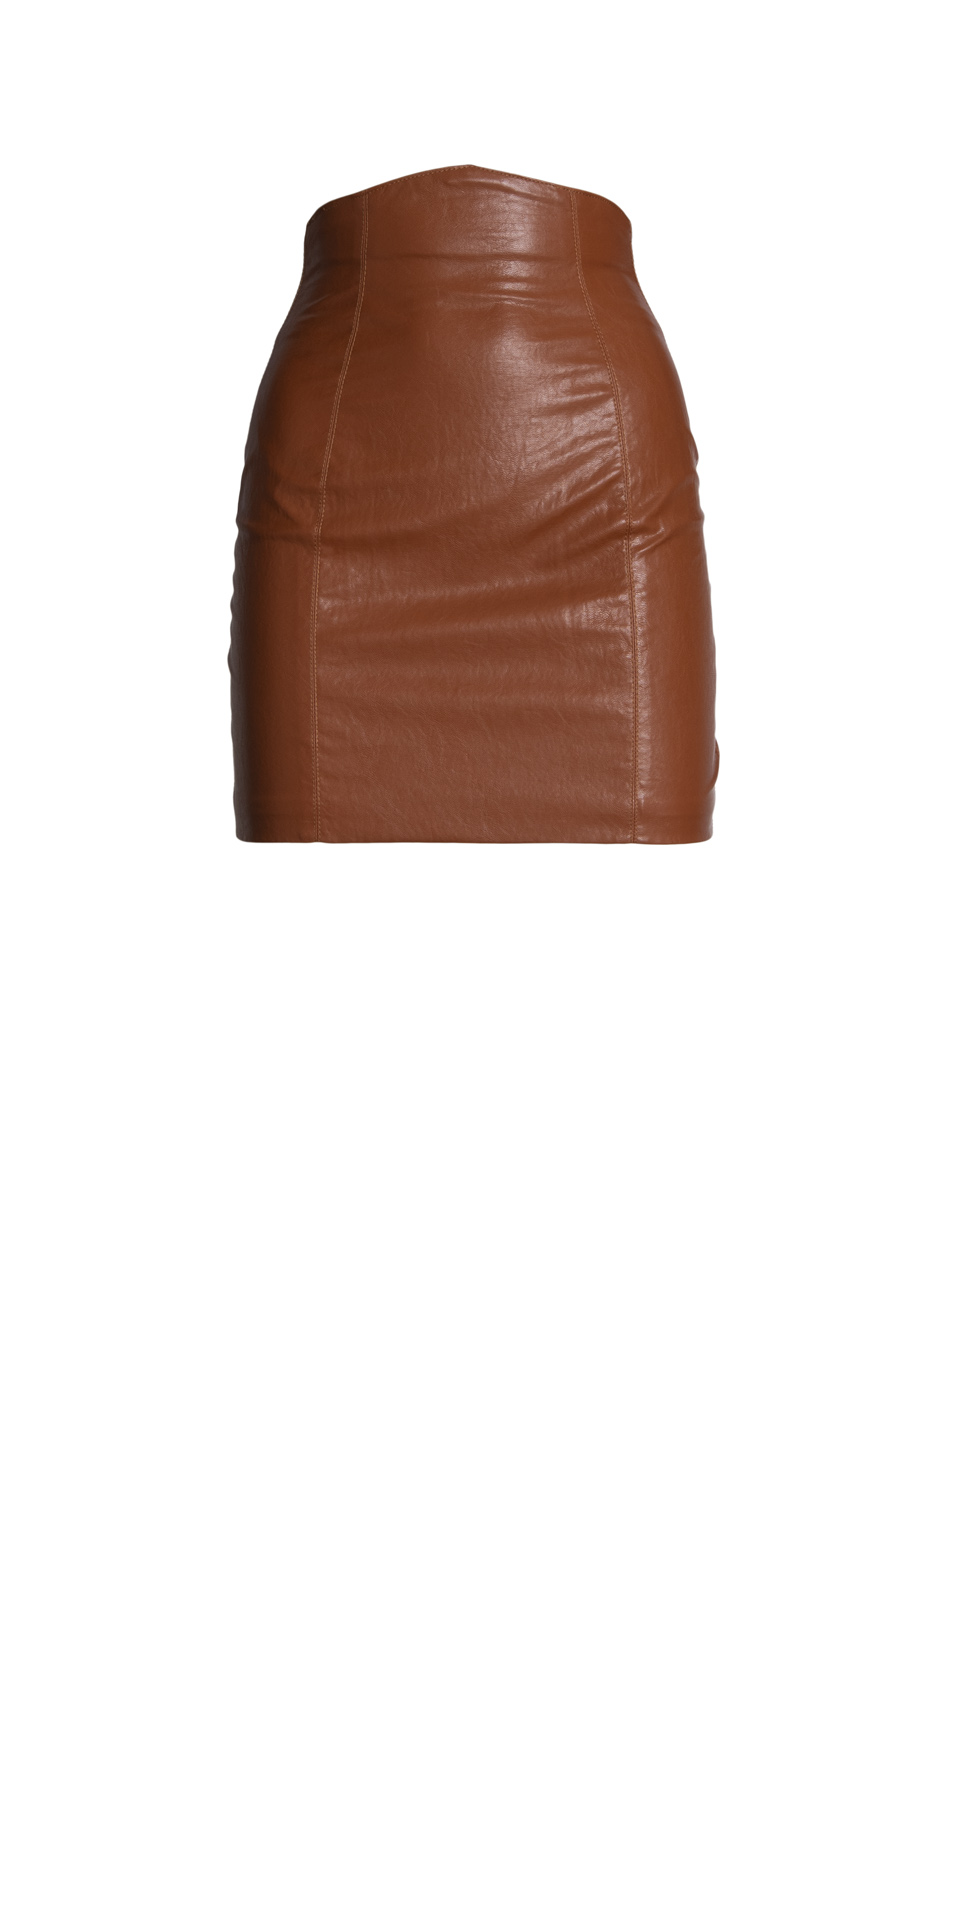 SS20 – THE CORSET SKIRT LEATHER CUOIO